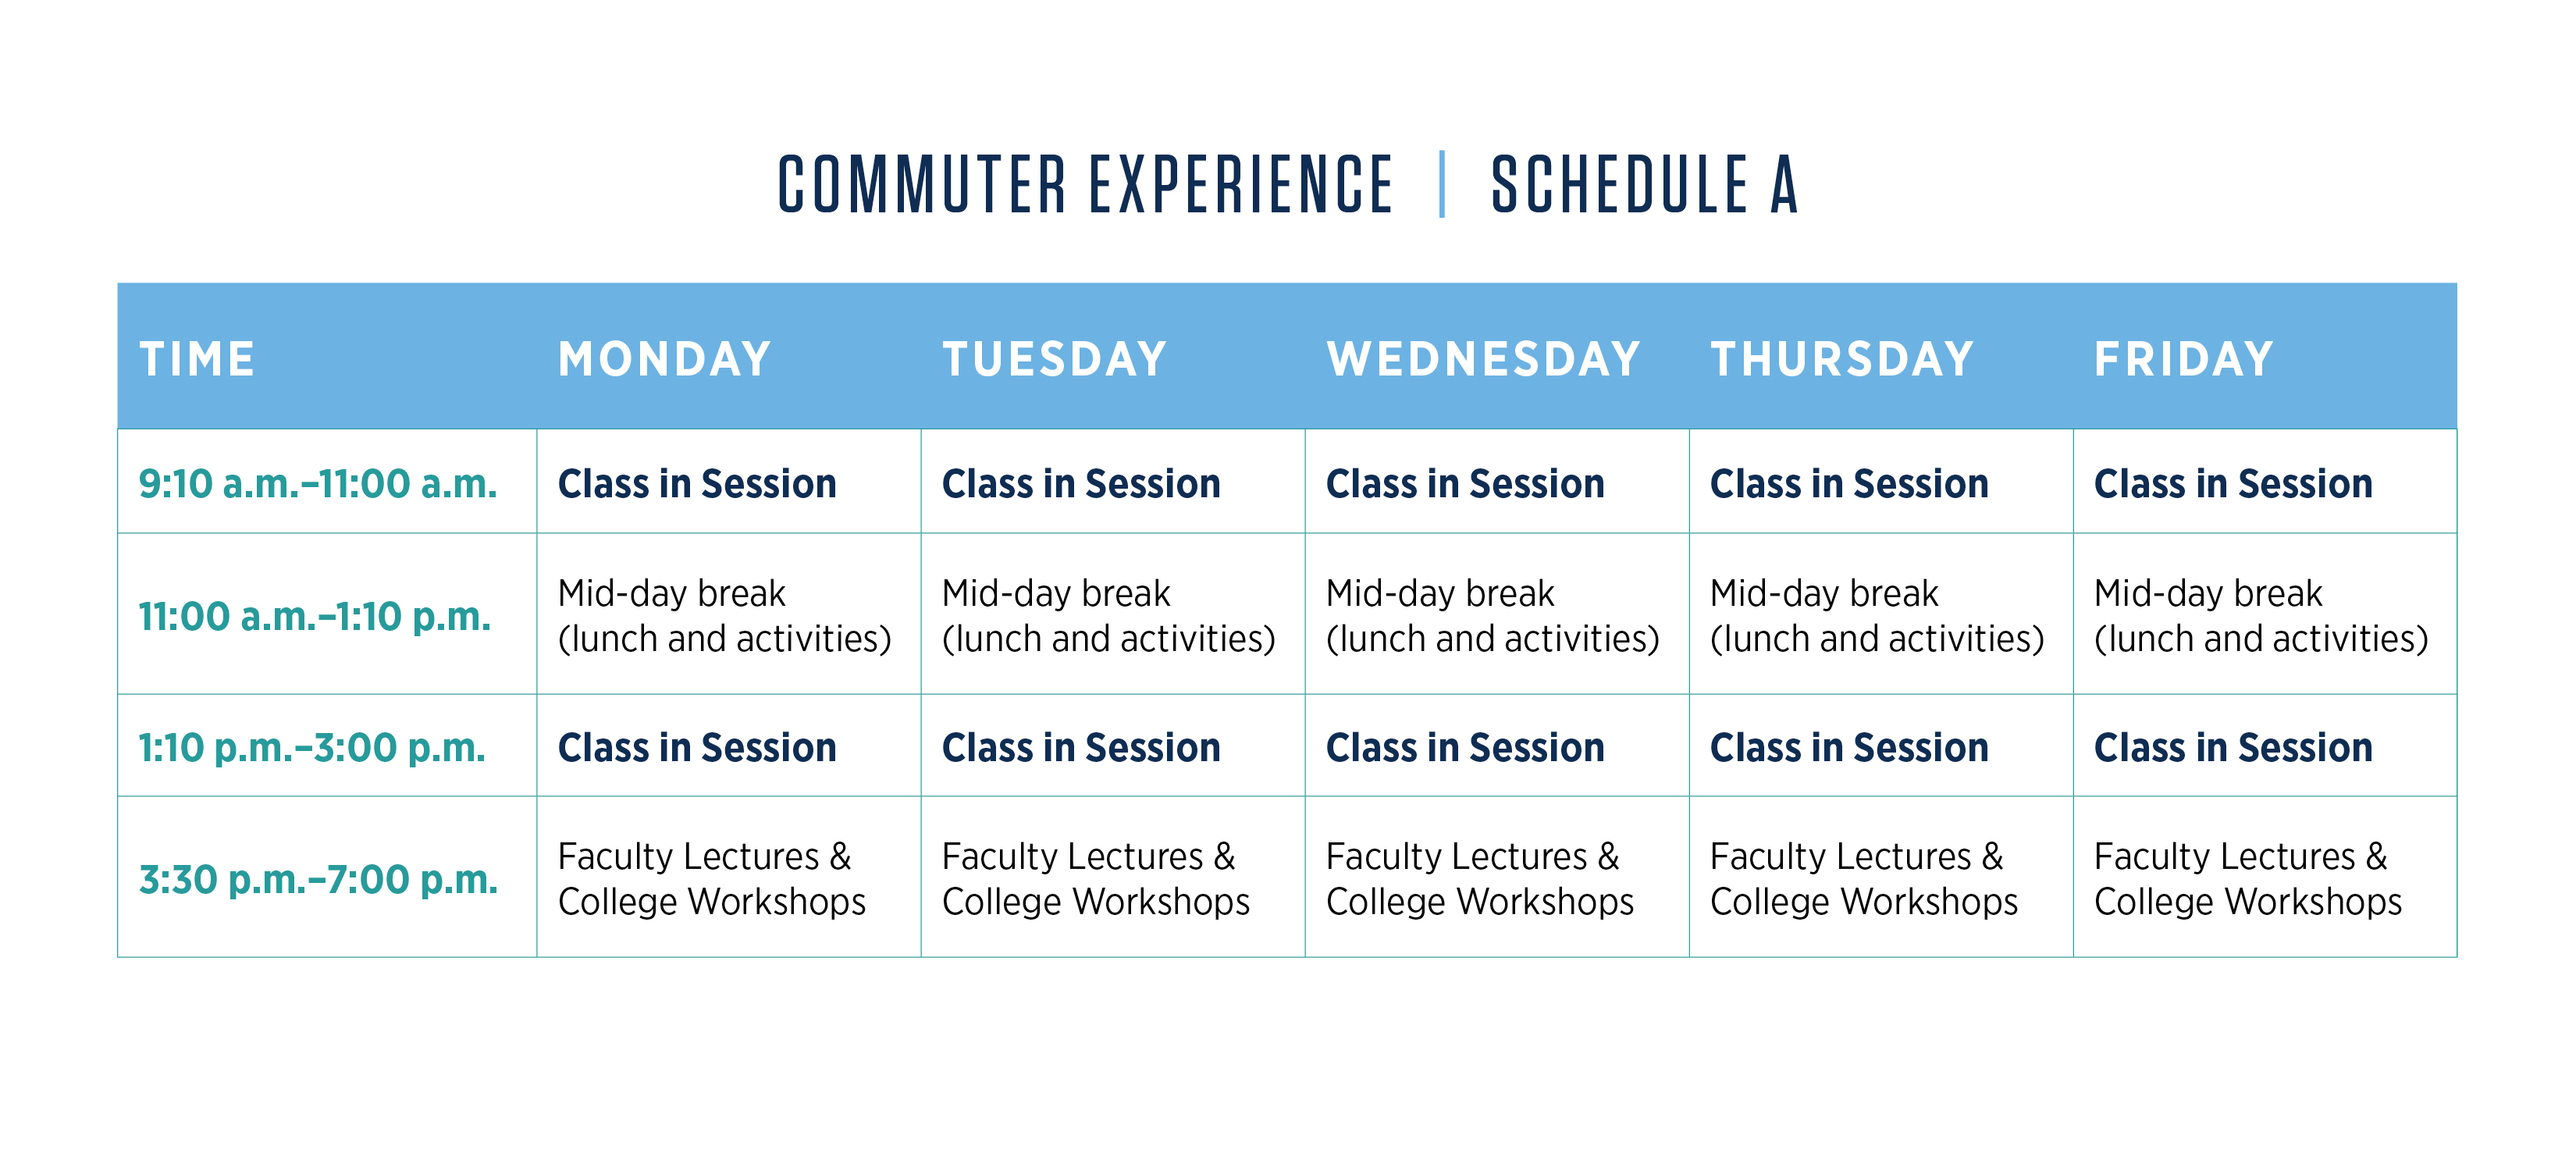 Enlargeable graphic showing Commuter Experiance Schedule A